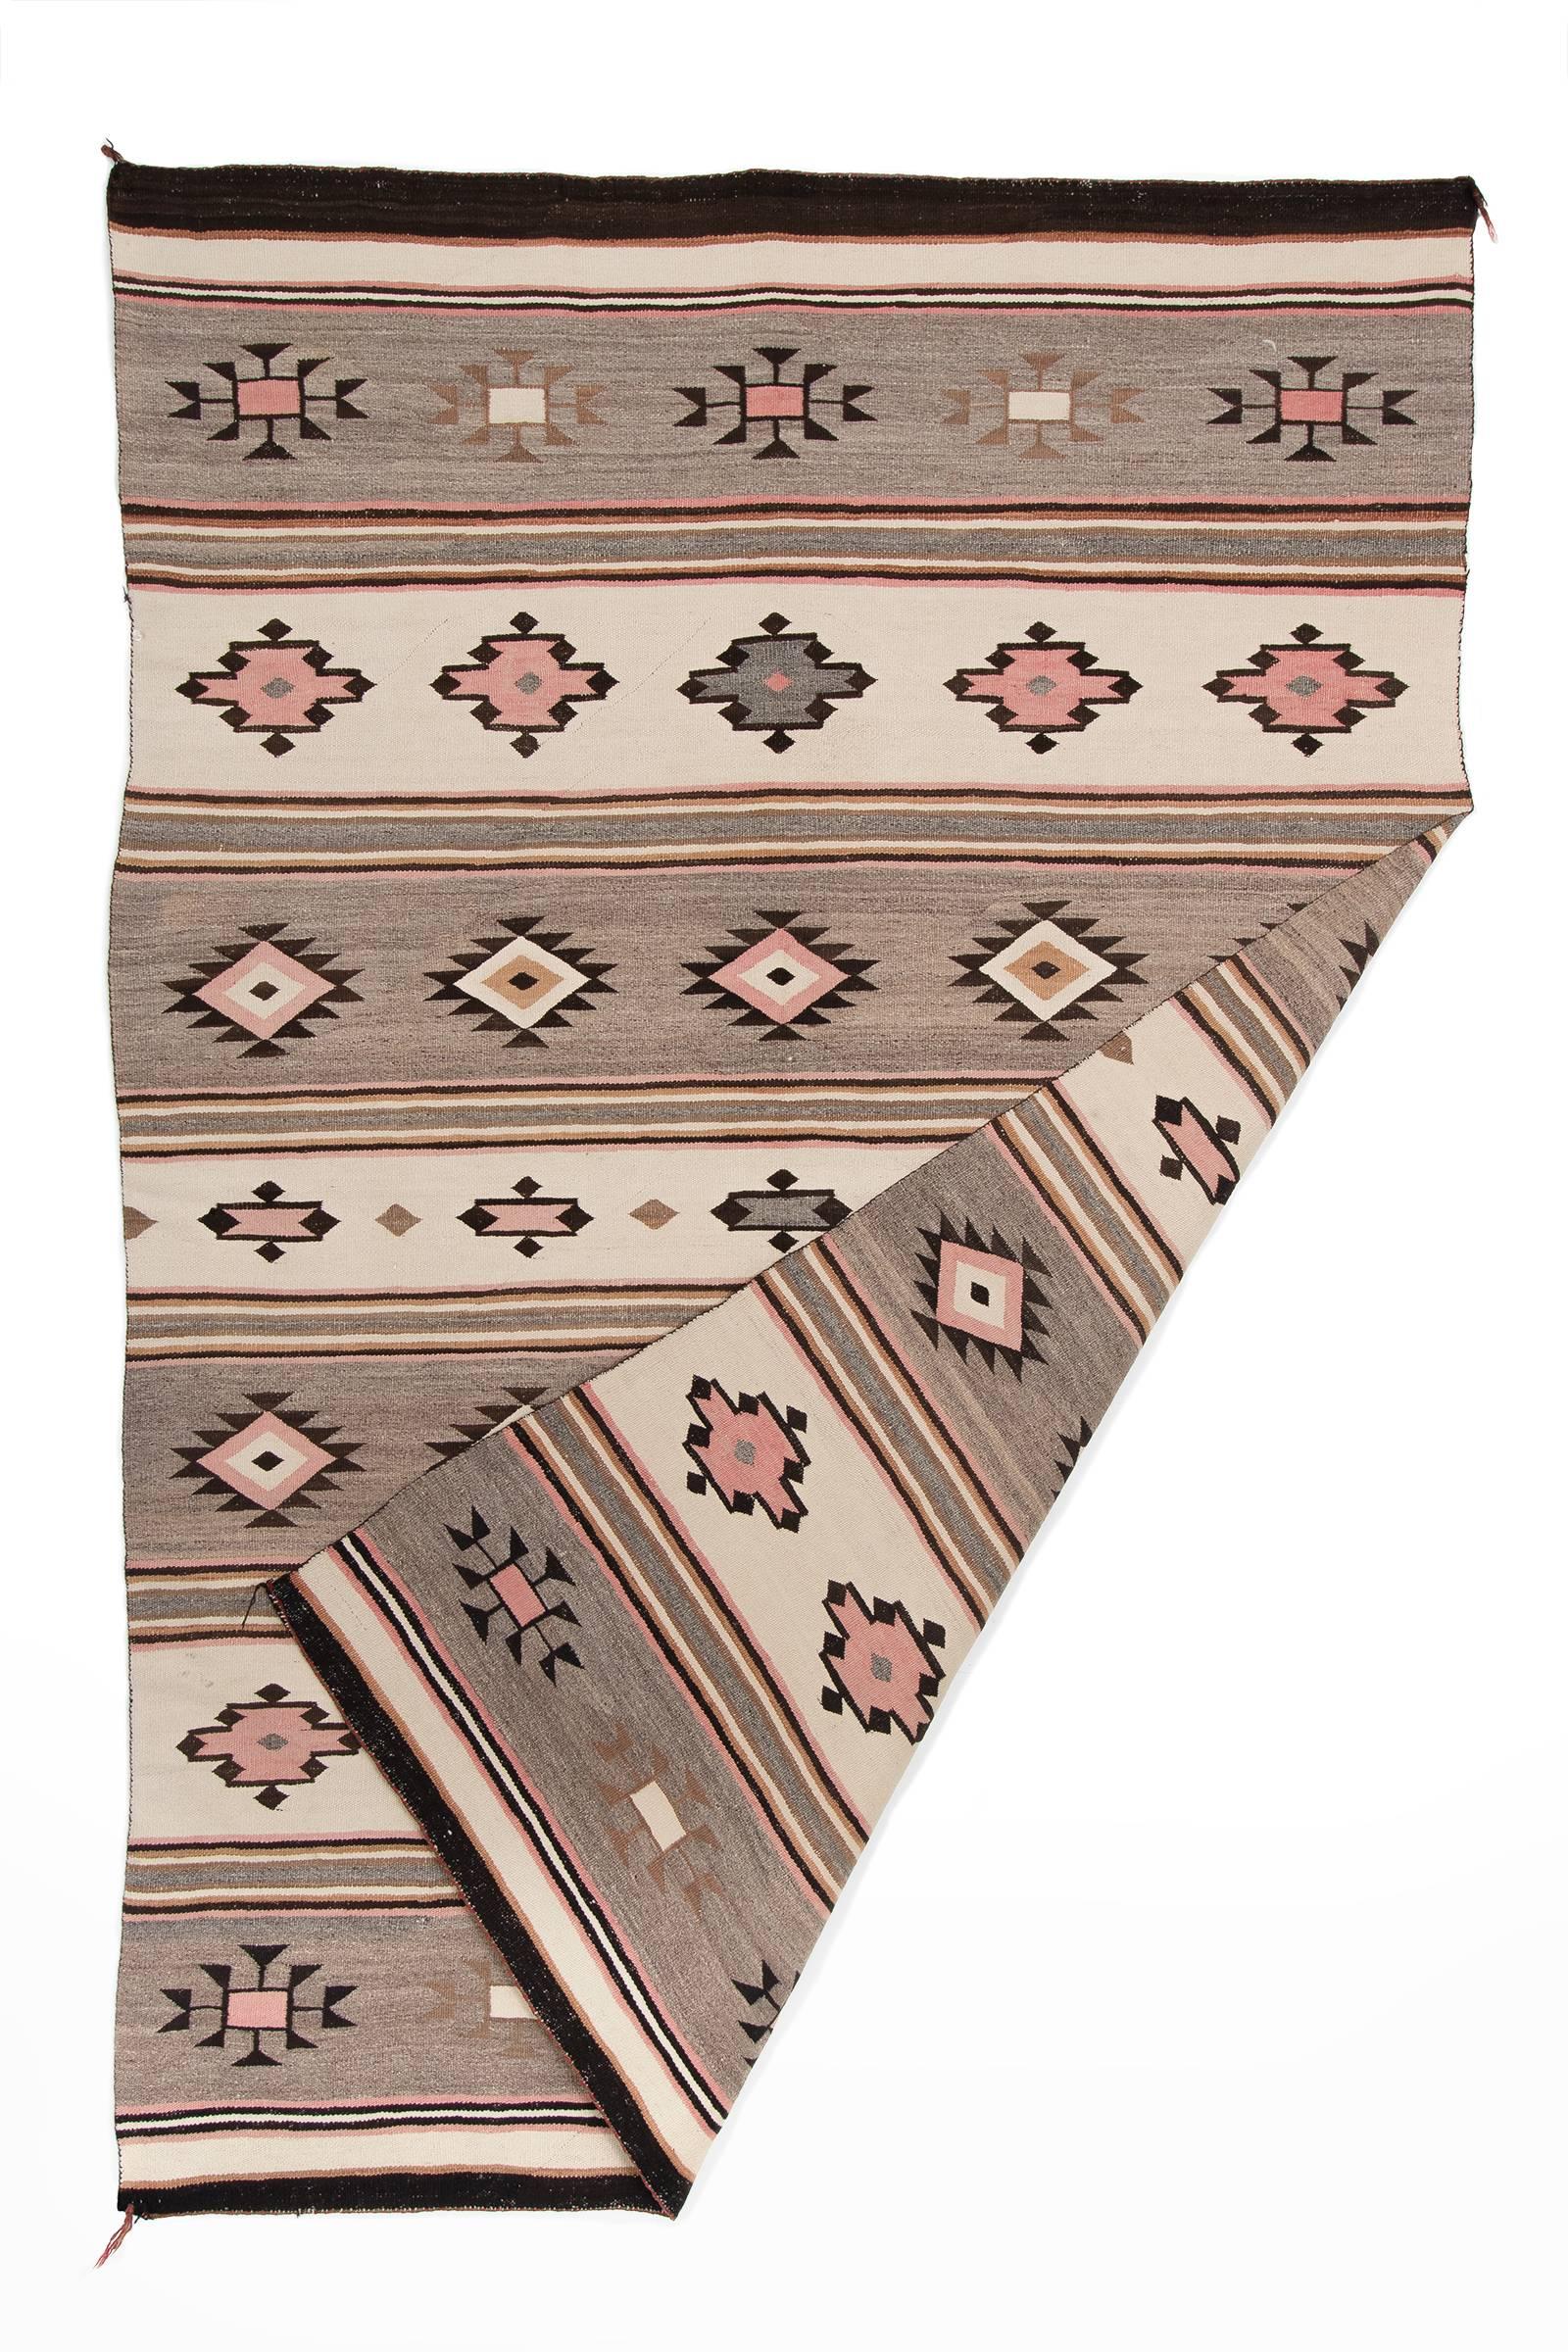 A vintage Navajo rug woven of native hand-spun wool in a Chinle Revival pattern. This style of Regional Rug began in the 1920s at Chinle, Arizona. A classic banded Chinle design with diamonds in natural grey, ivory and brown fleece with aniline-dyed